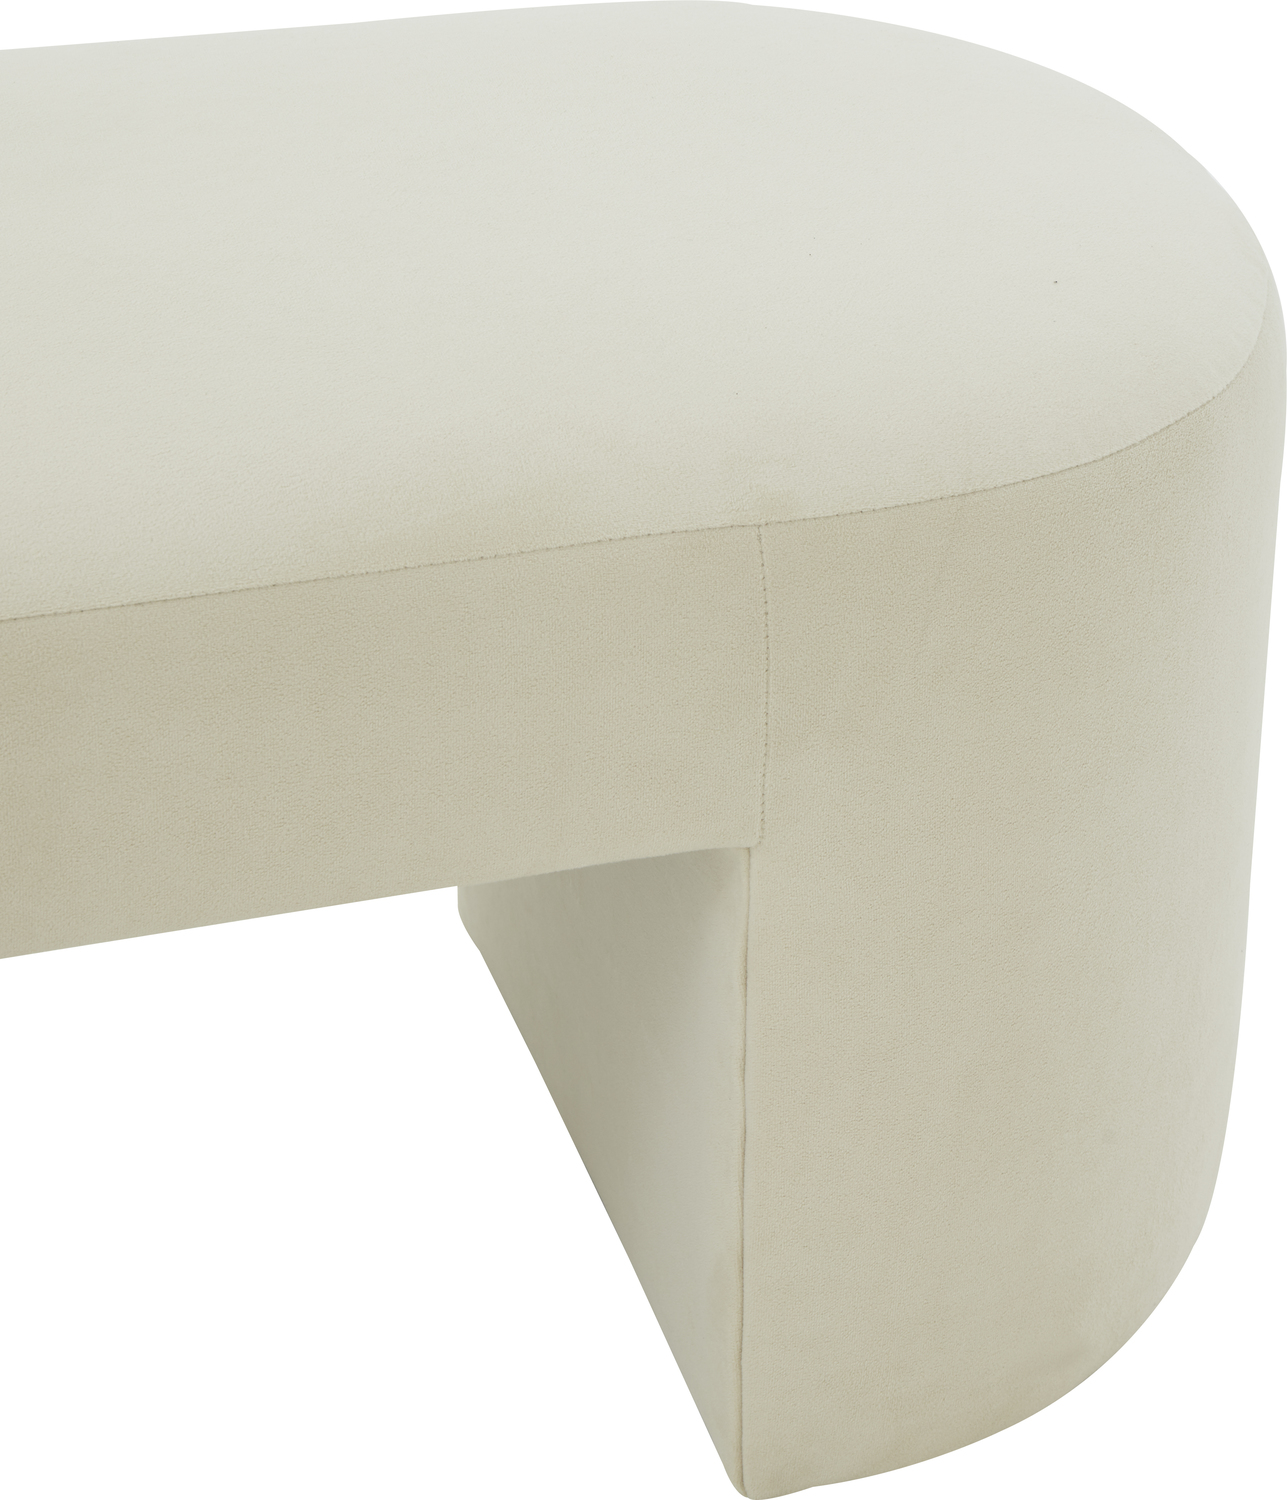 upholstered bench black Contemporary Design Furniture Benches Cream